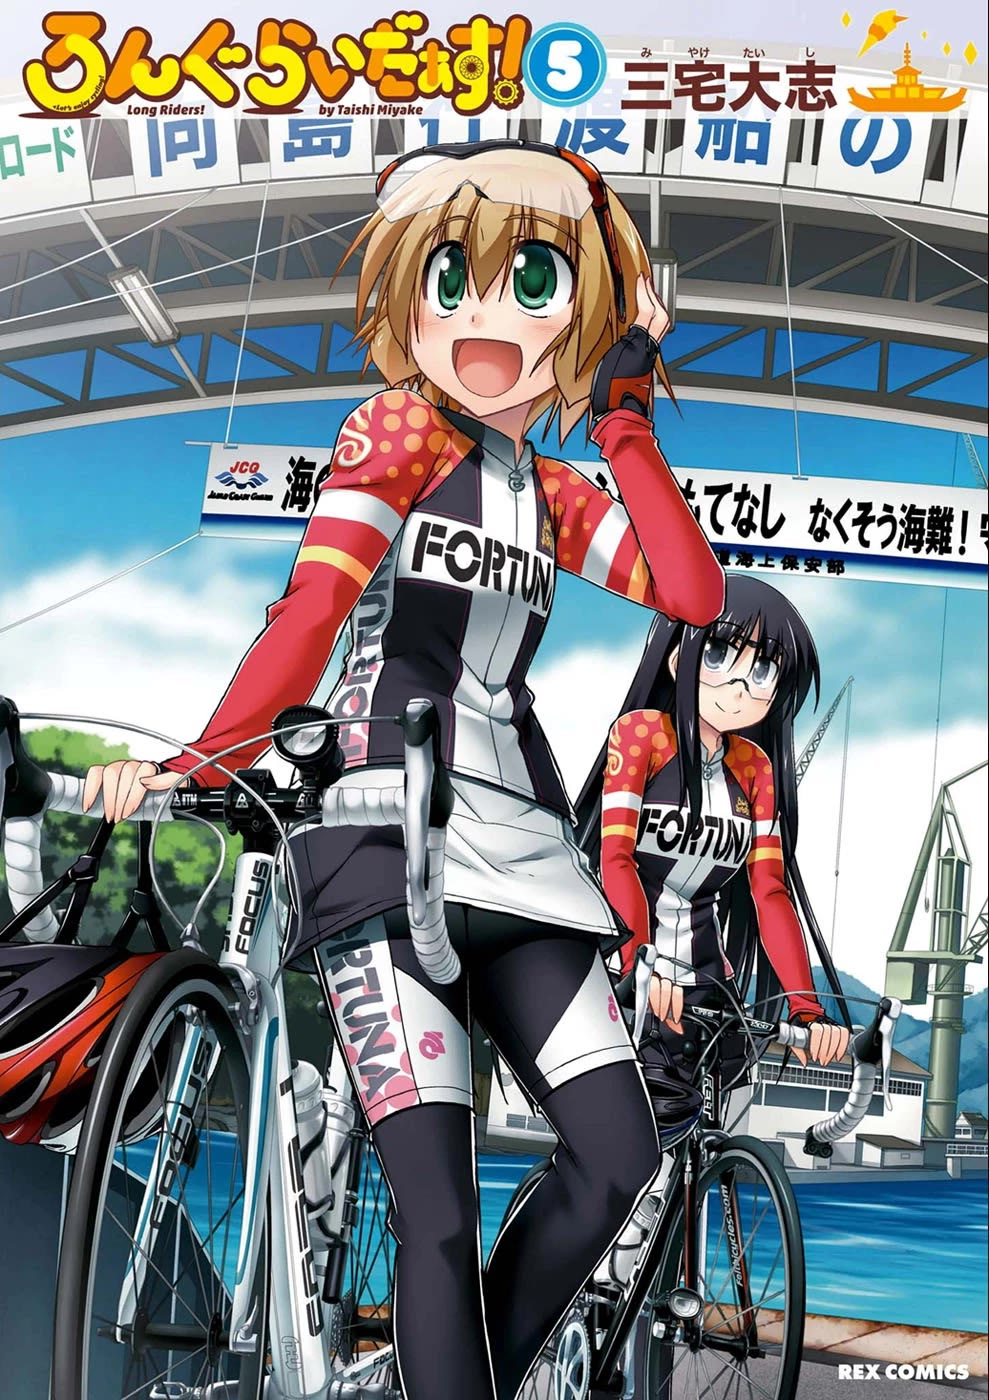 Long Riders! - chapter 18 - #1